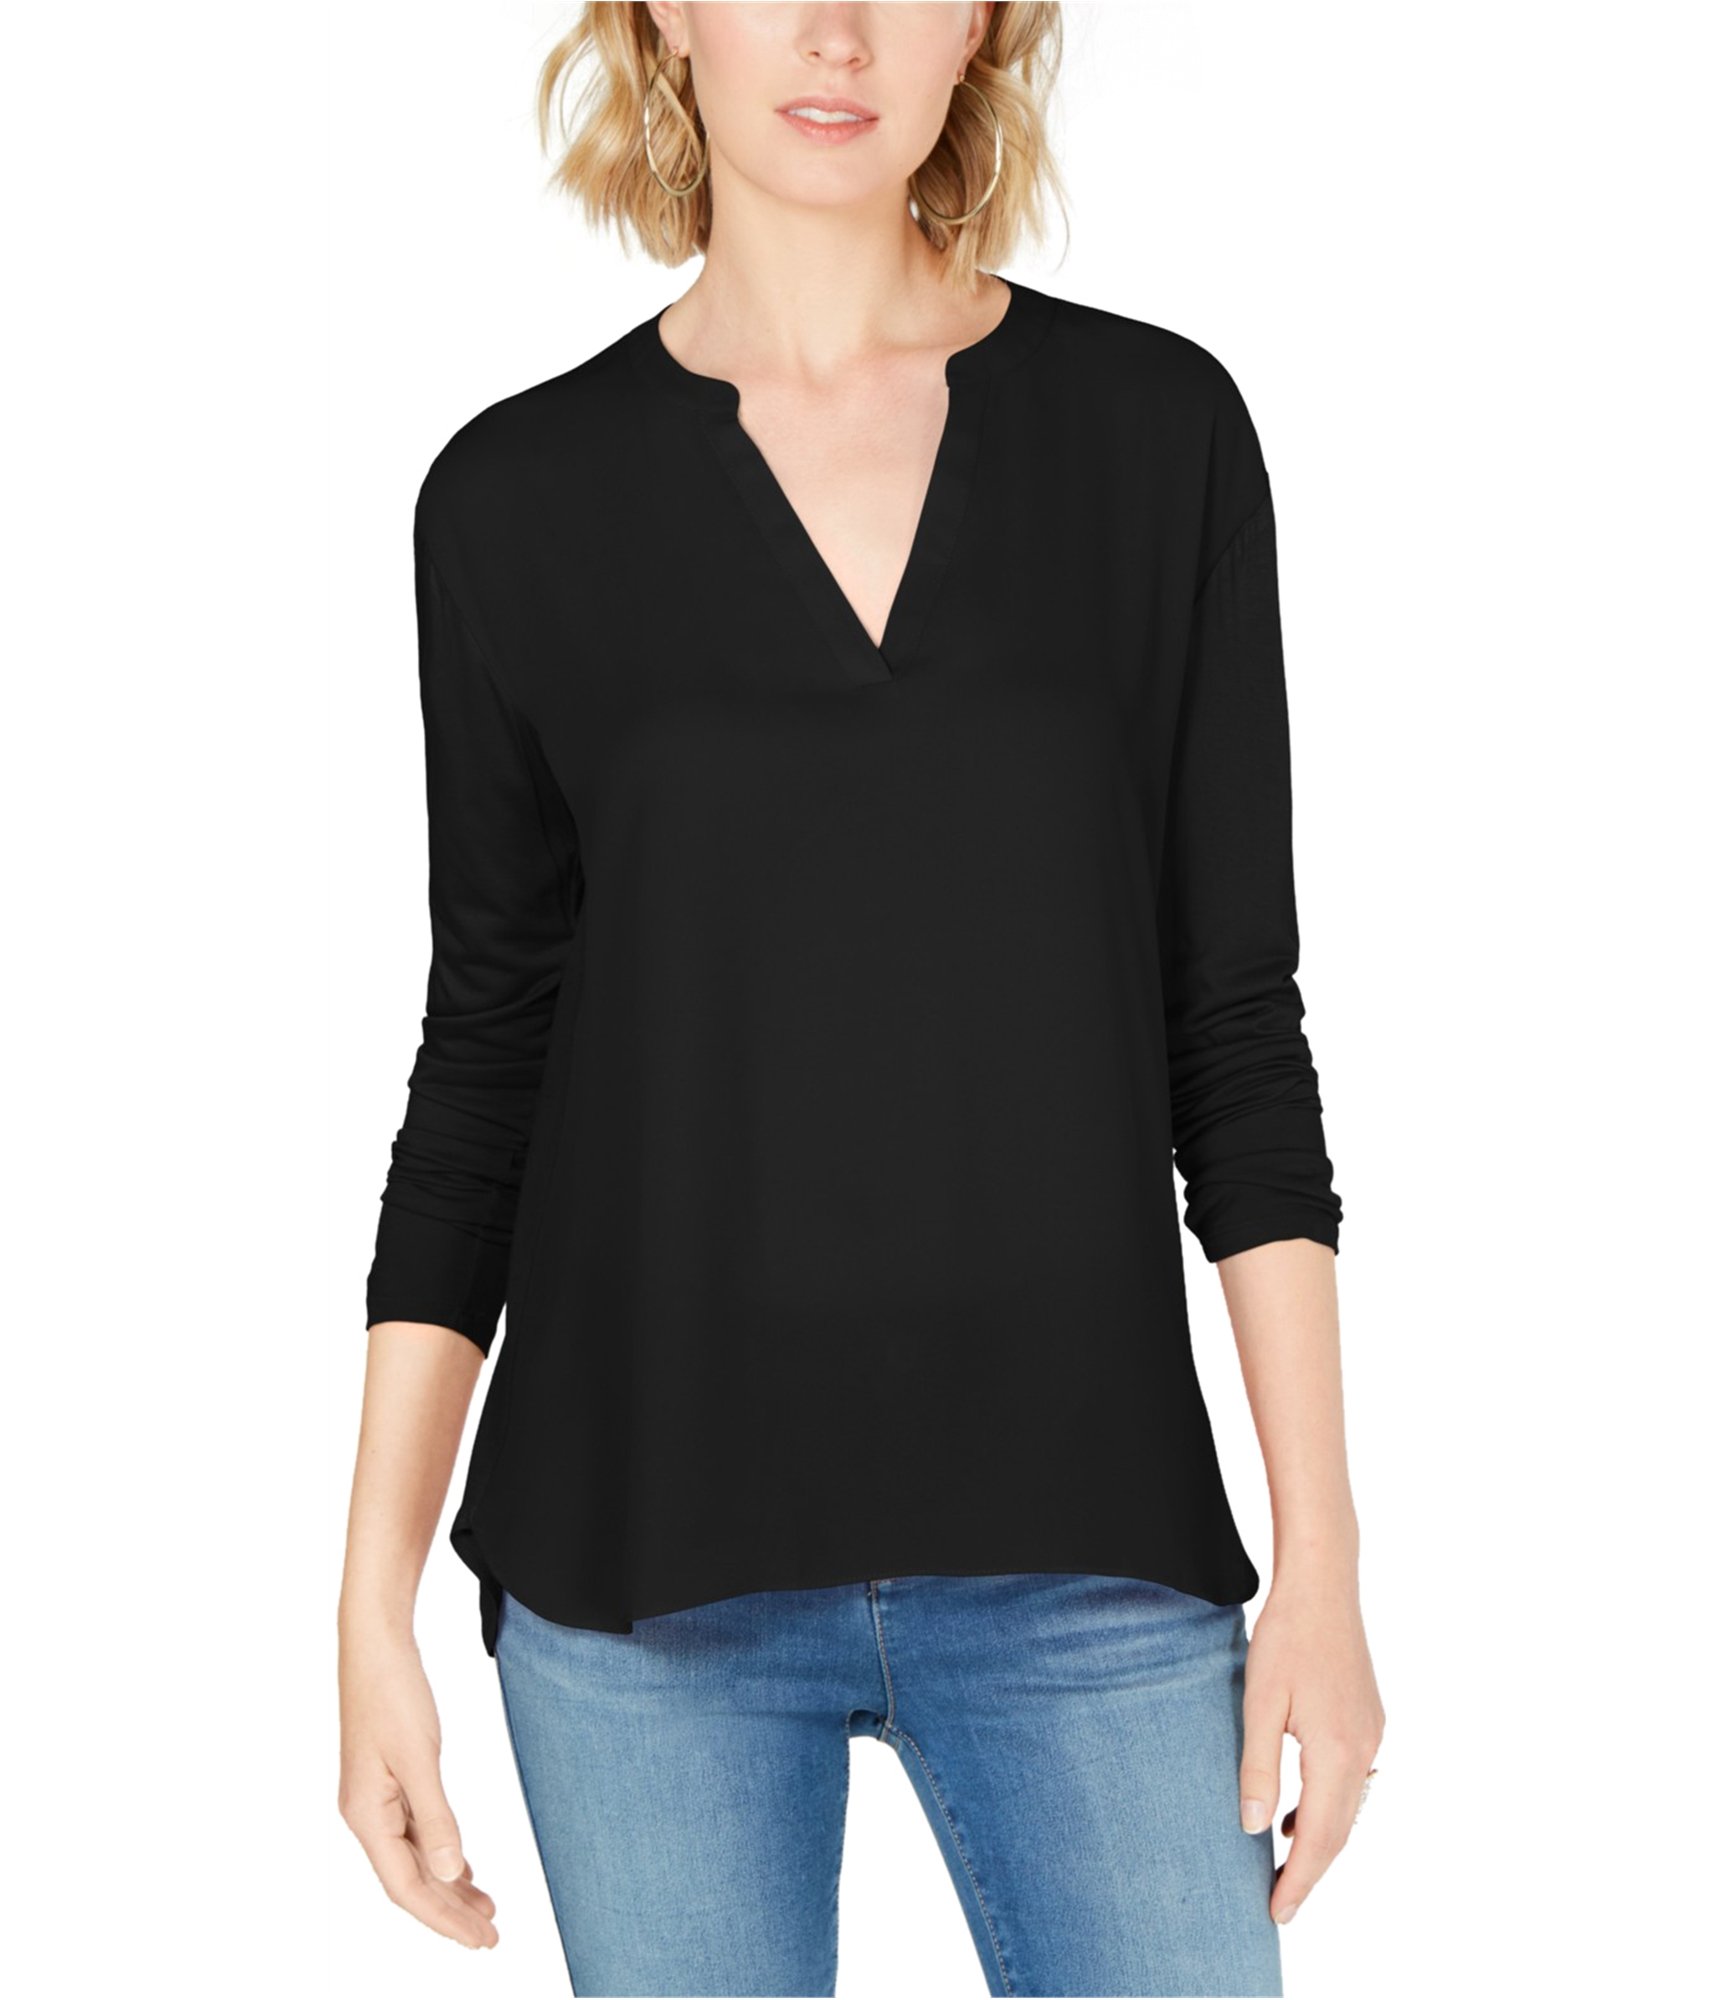 Woman-wearing-pullover-blouse